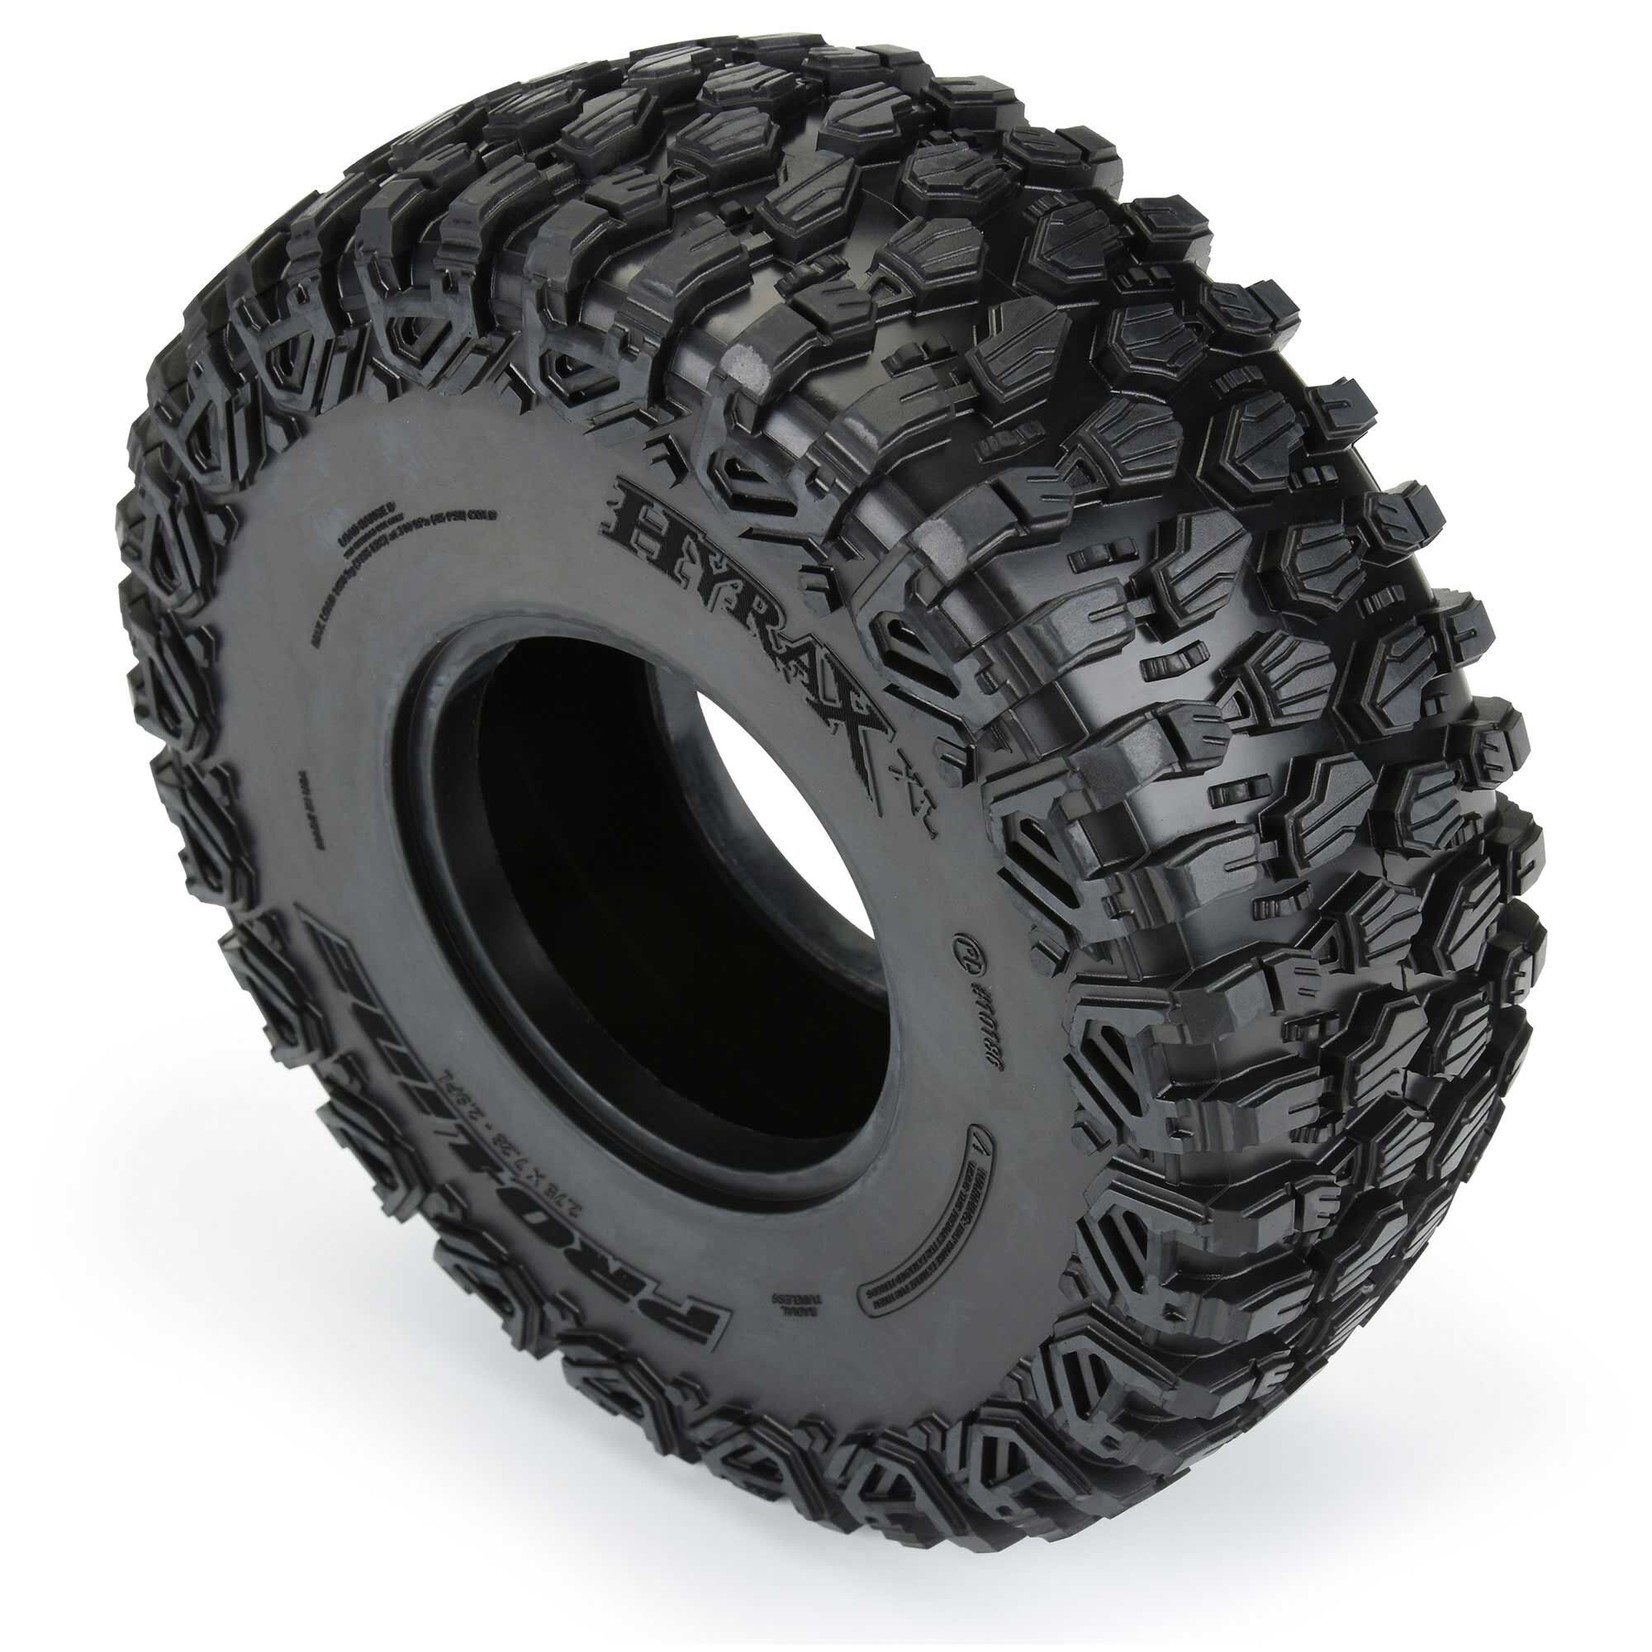 Pro-Line 1/6 Hyrax XL G8 Front/Rear 2.9" Rock Crawling Tires (2)